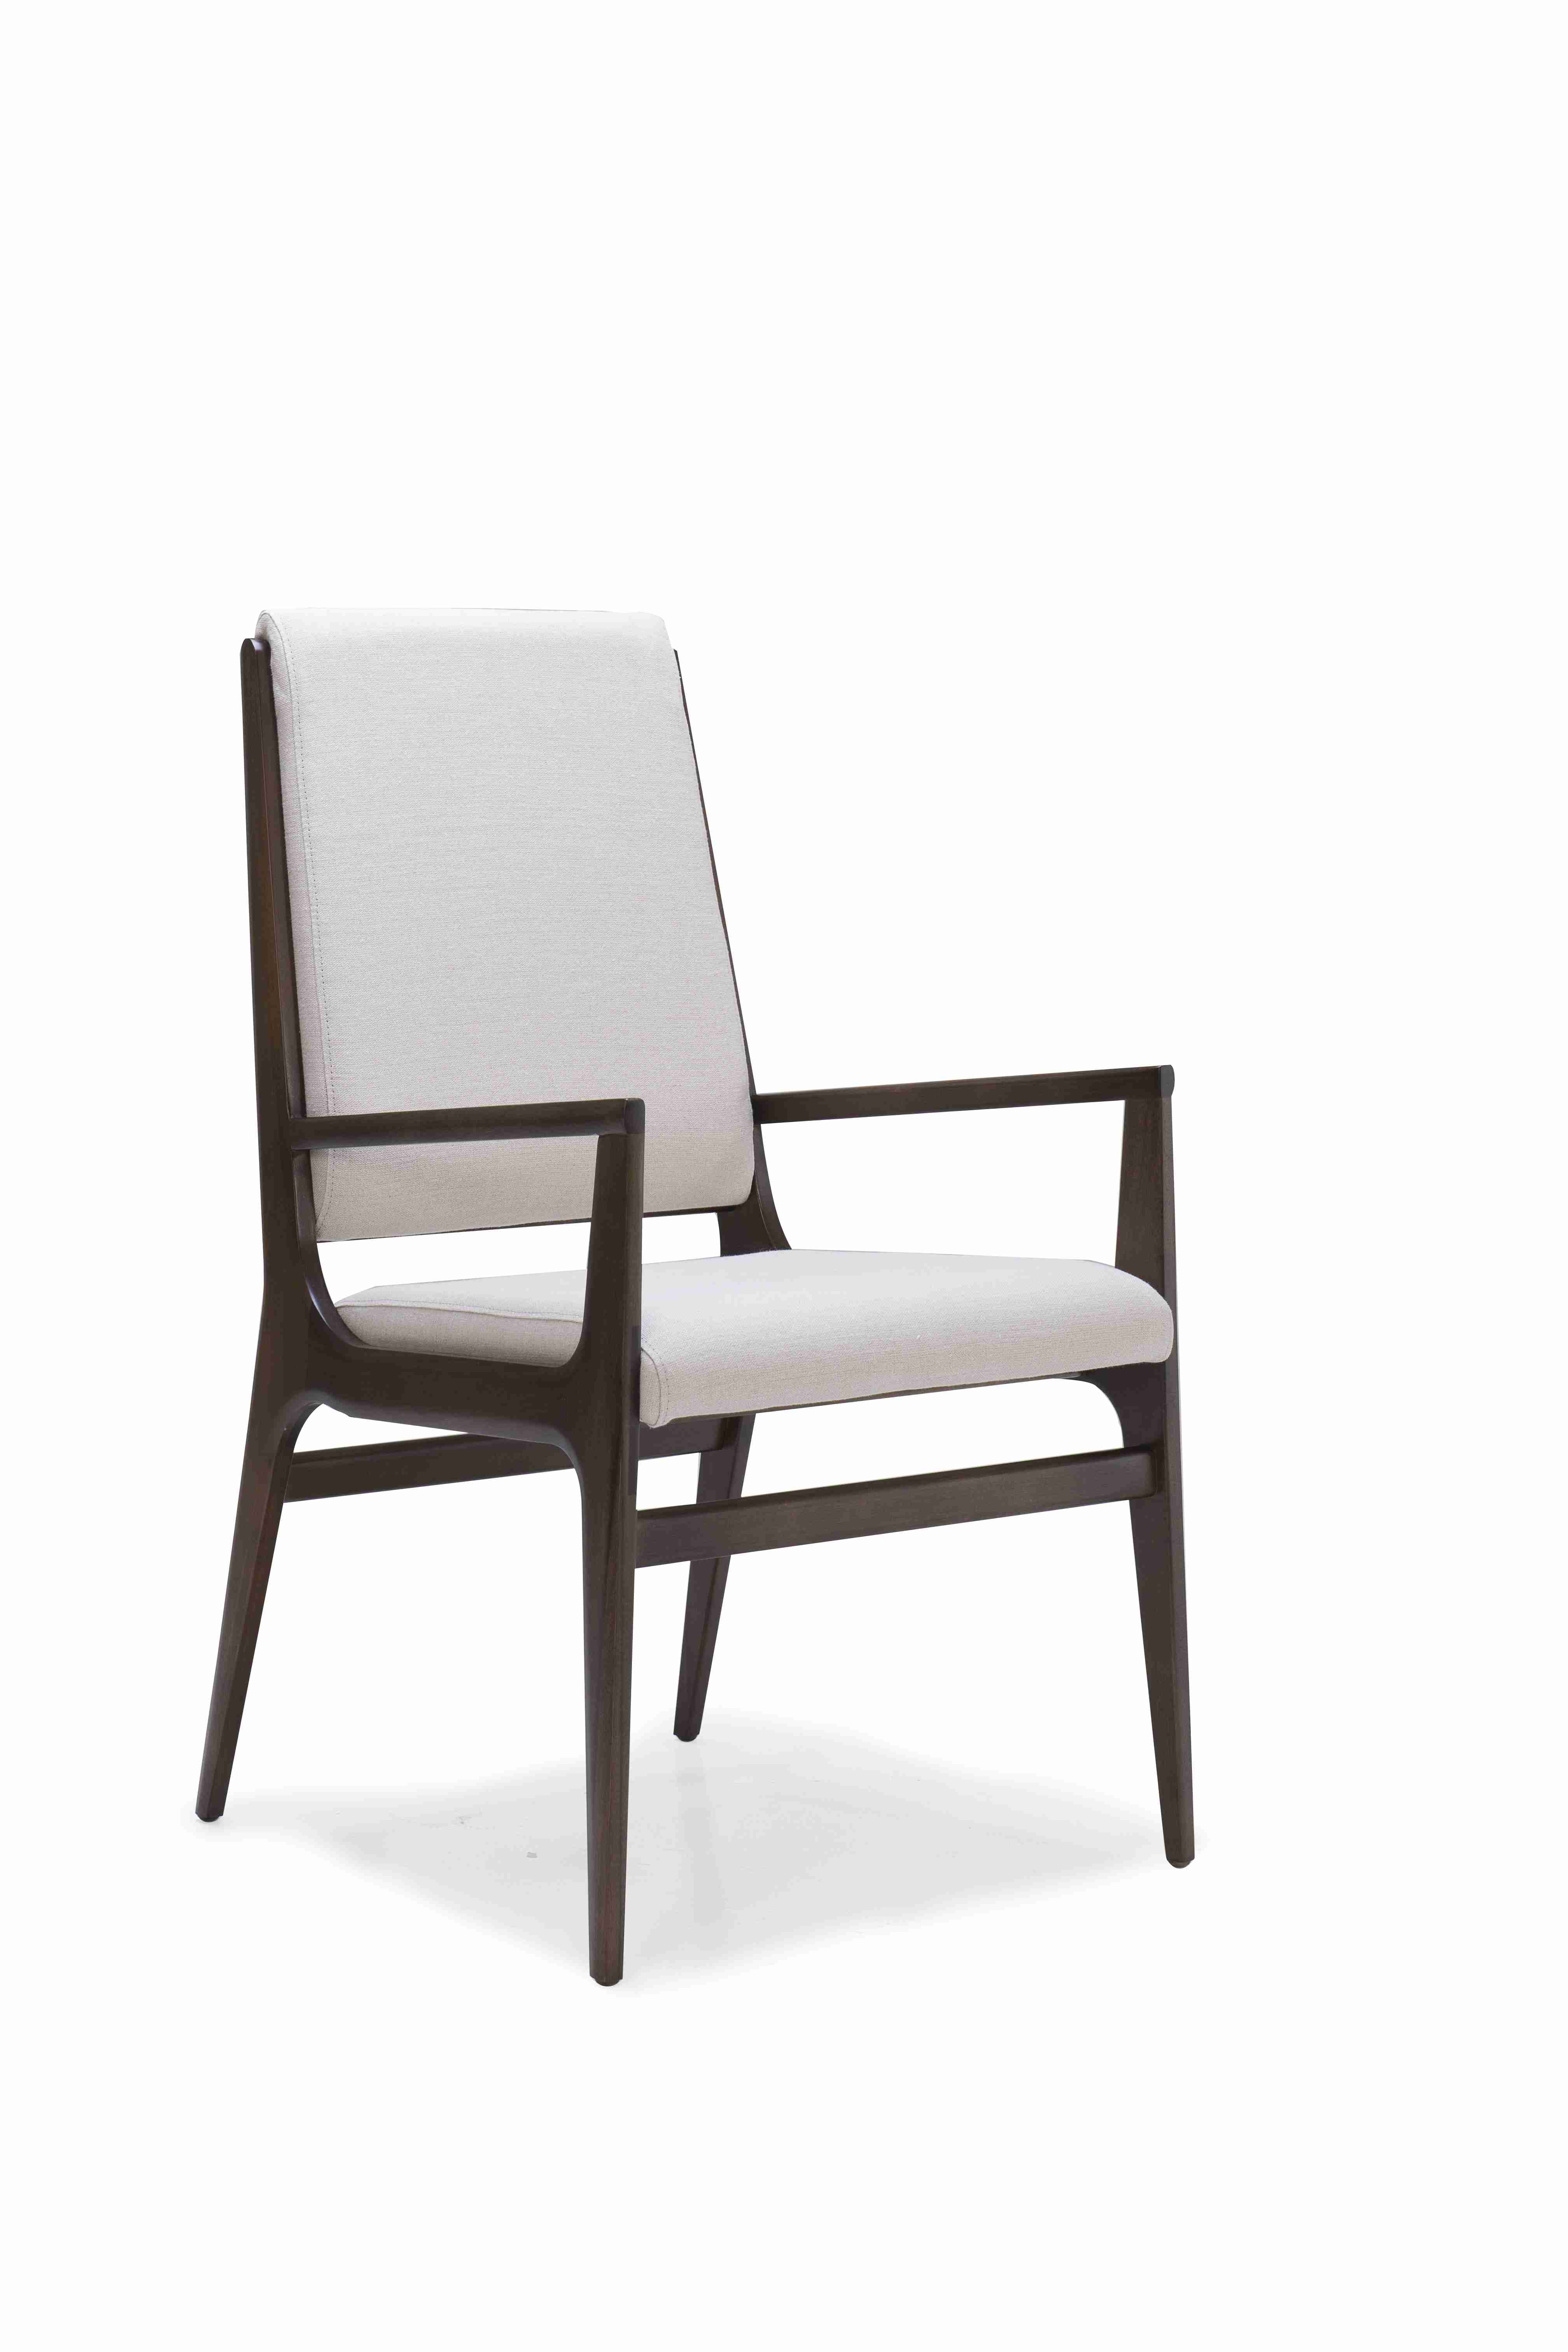 GURIZADA CHAIR WITH ARMS